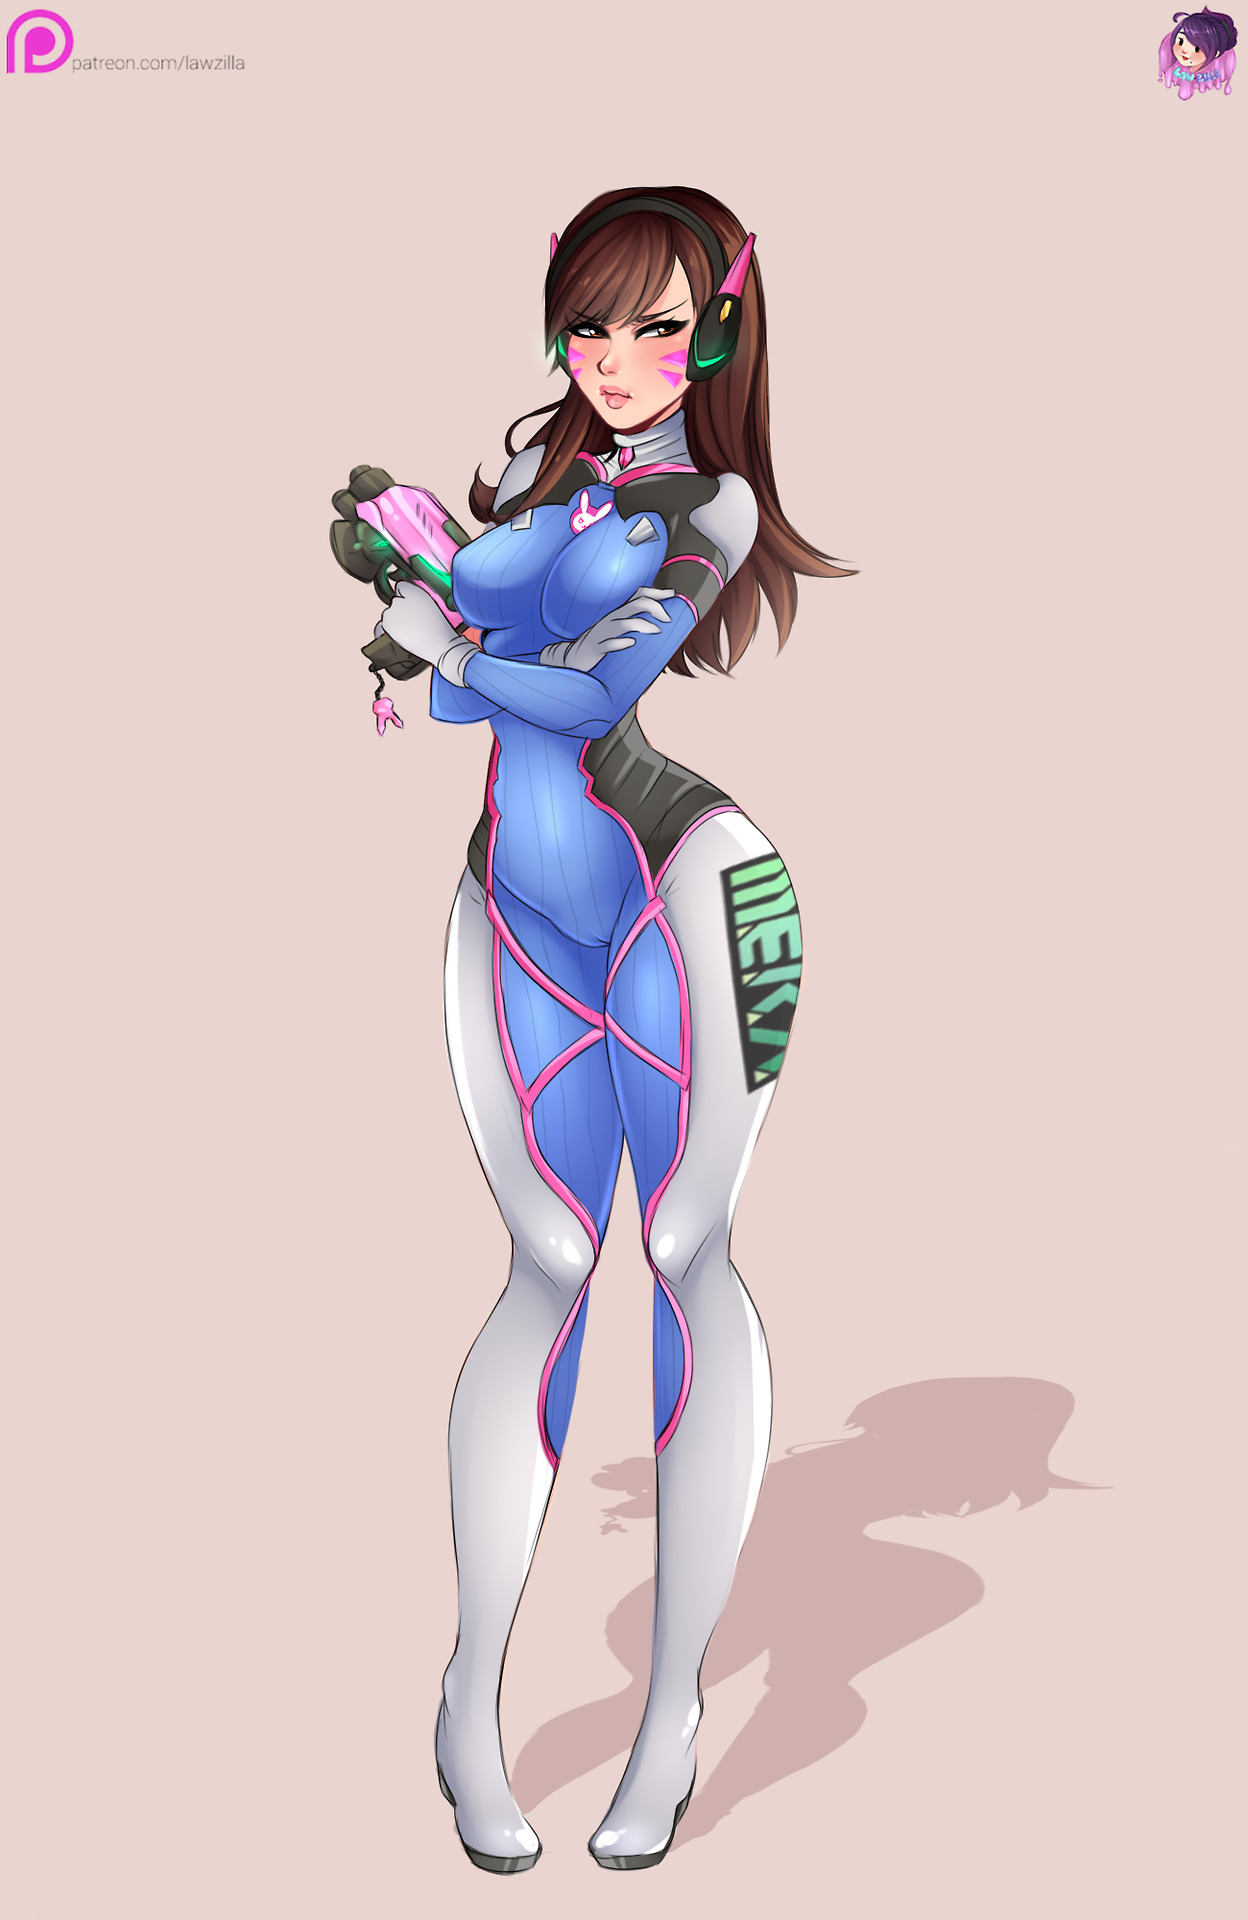 D.Va from Overwatch for TheGameFreak &lt;3 Glad I could draw her, she’s one